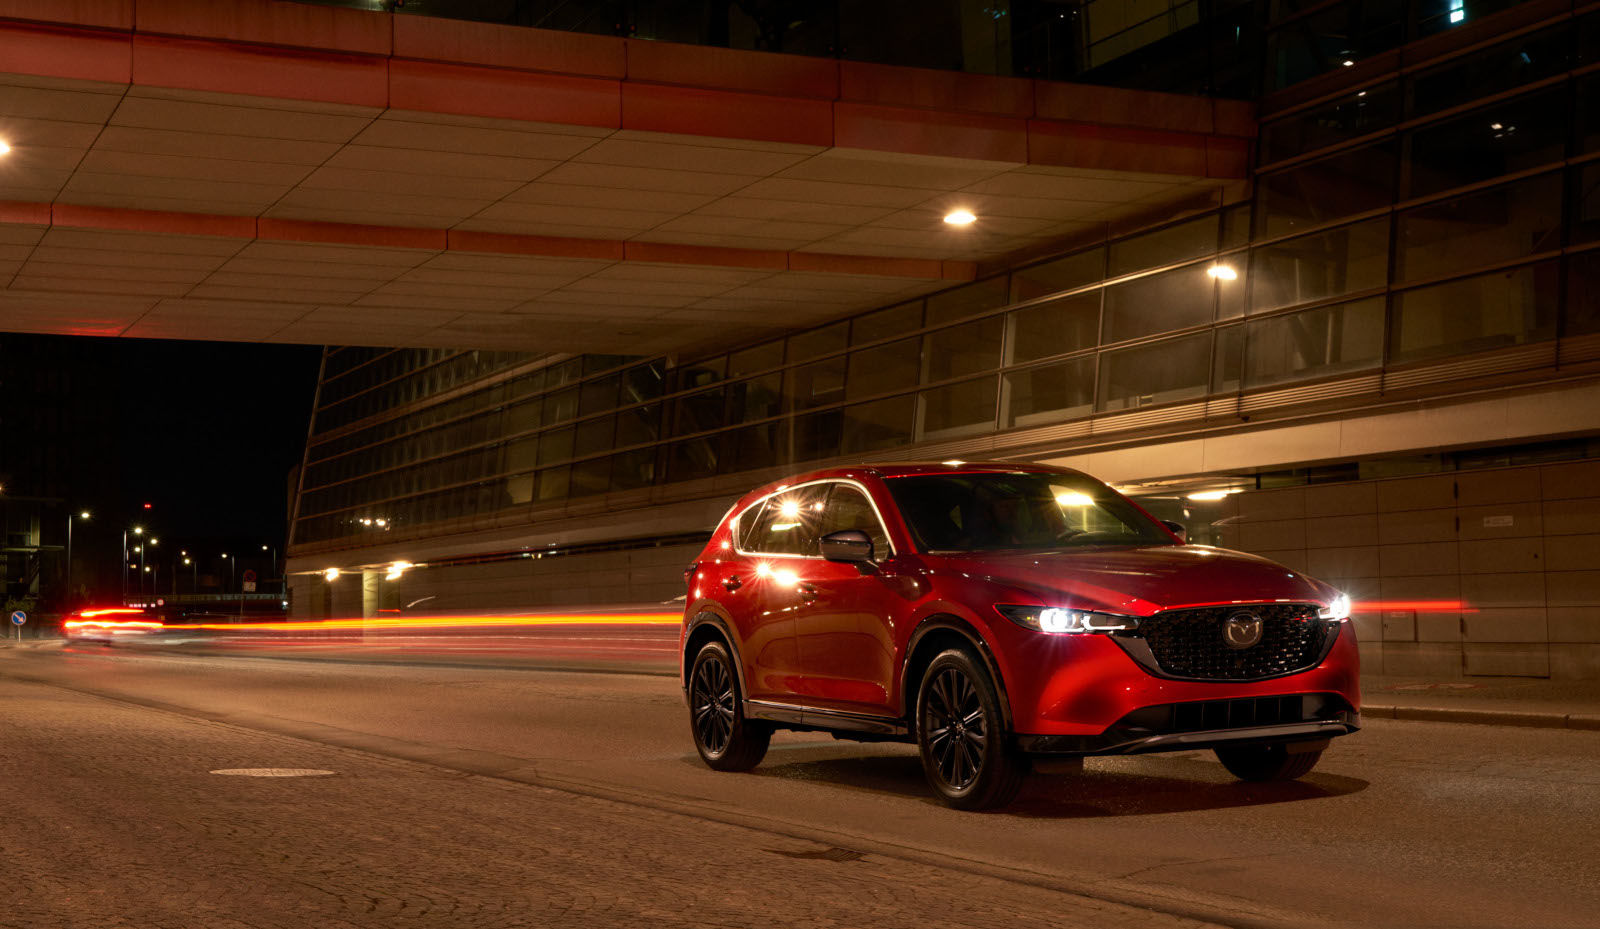 Top Four Reasons Why You Should Consider a New Mazda CX-5